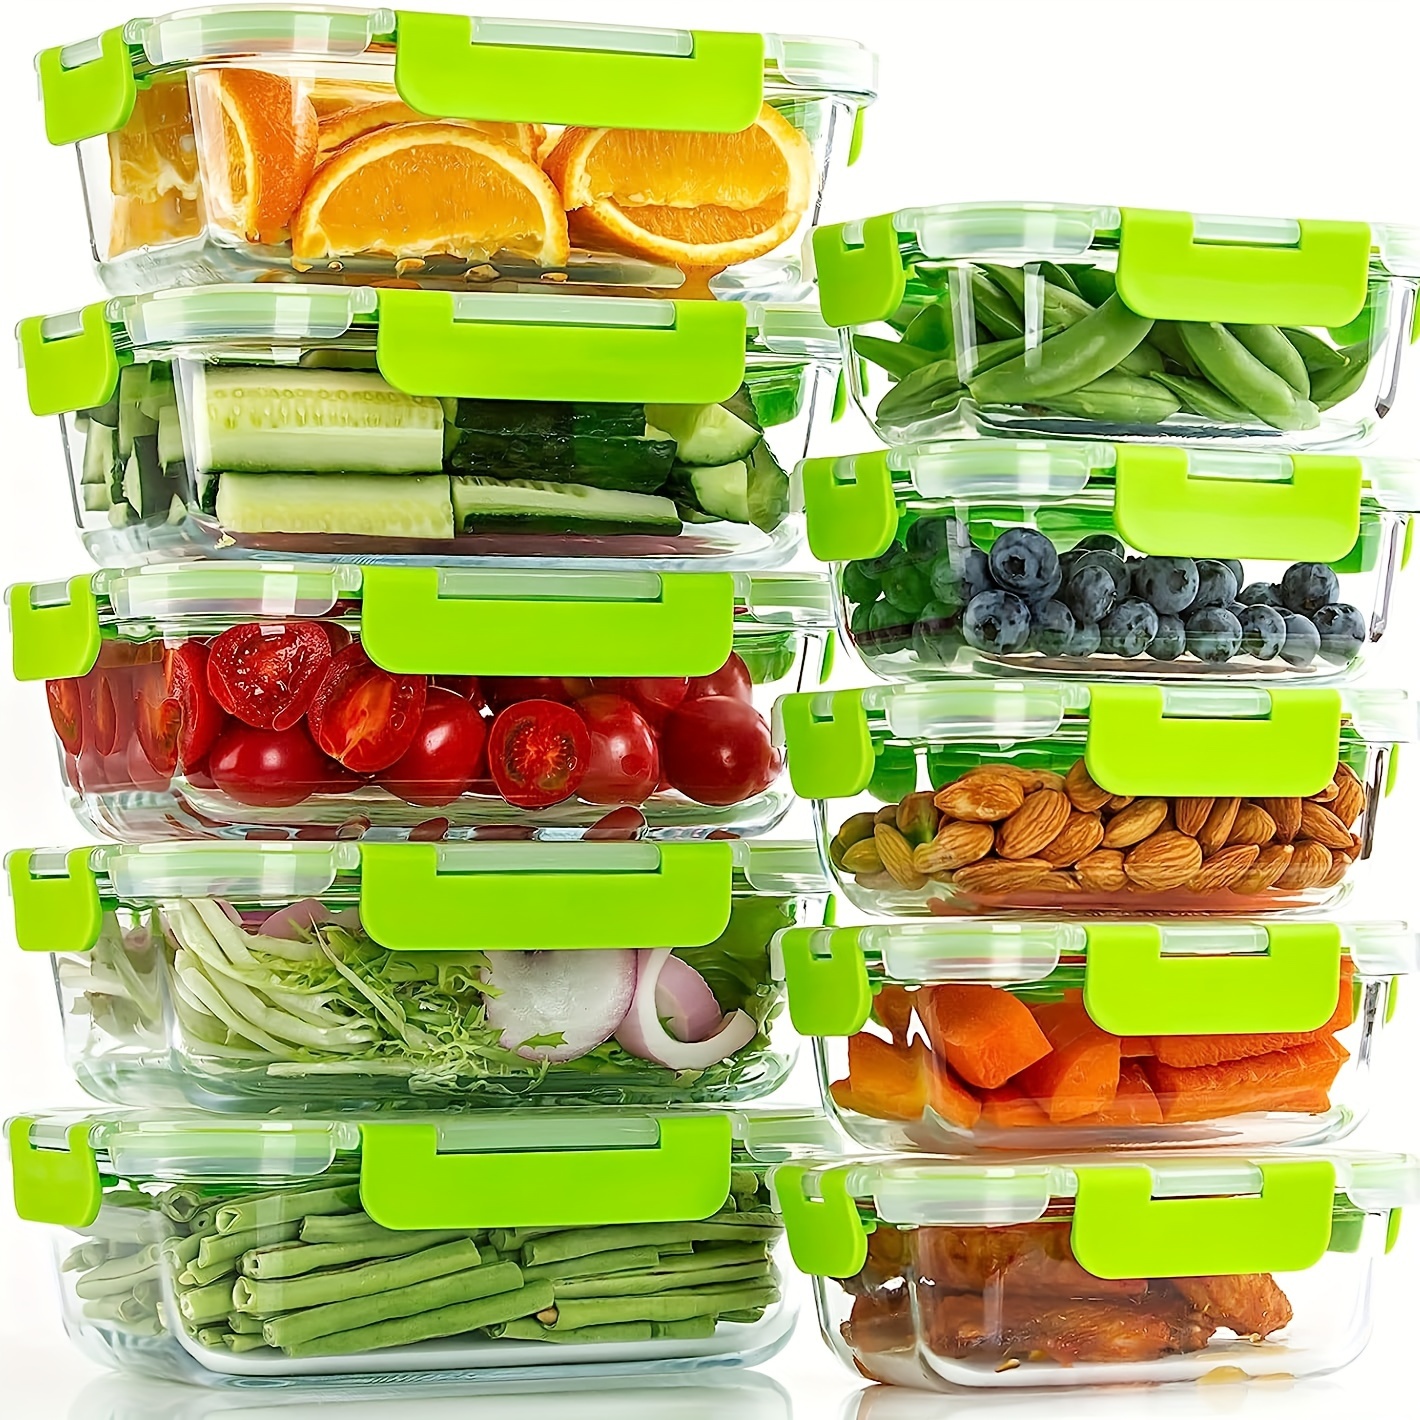 

10pcs Glass Food Storage Containers Set, Glass Meal Prep Containers With Leakproof Airtight Lids, Bpa Free, Glass Bento Boxes, Microwave & Freezer Safe, Home Kitchen Supplies